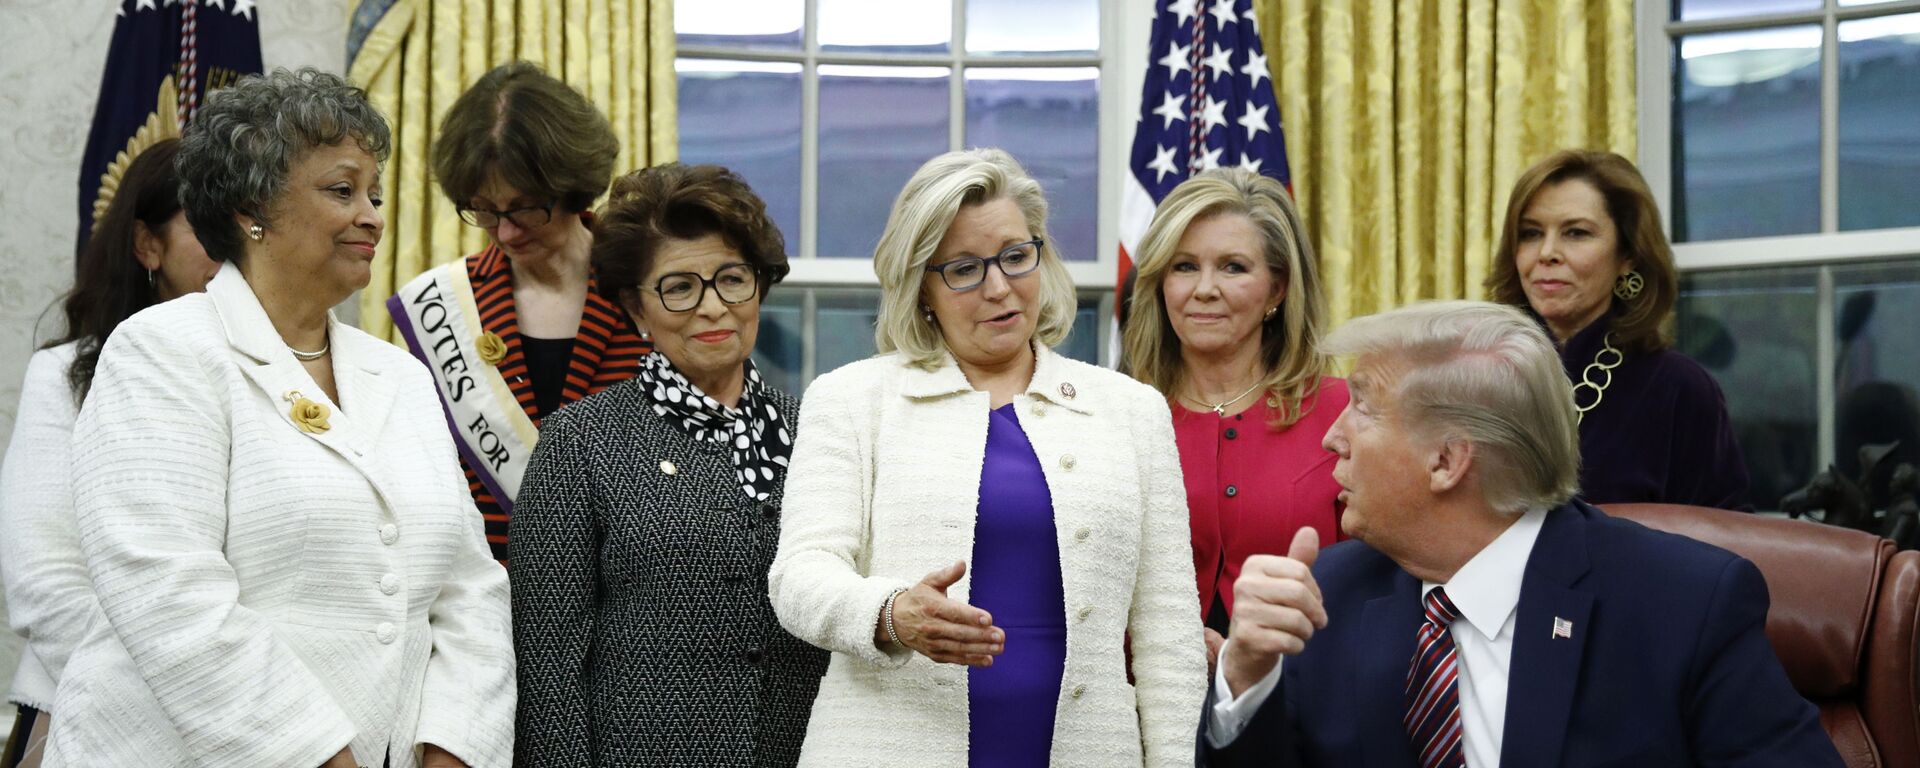 Rep. Liz Cheney, R-Wyo., center, speaks with President Donald Trump during a bill signing ceremony for the Women's Suffrage Centennial Commemorative Coin Act in the Oval Office of the White House, Monday, Nov. 25, 2019, in Washington. - Sputnik International, 1920, 17.08.2022